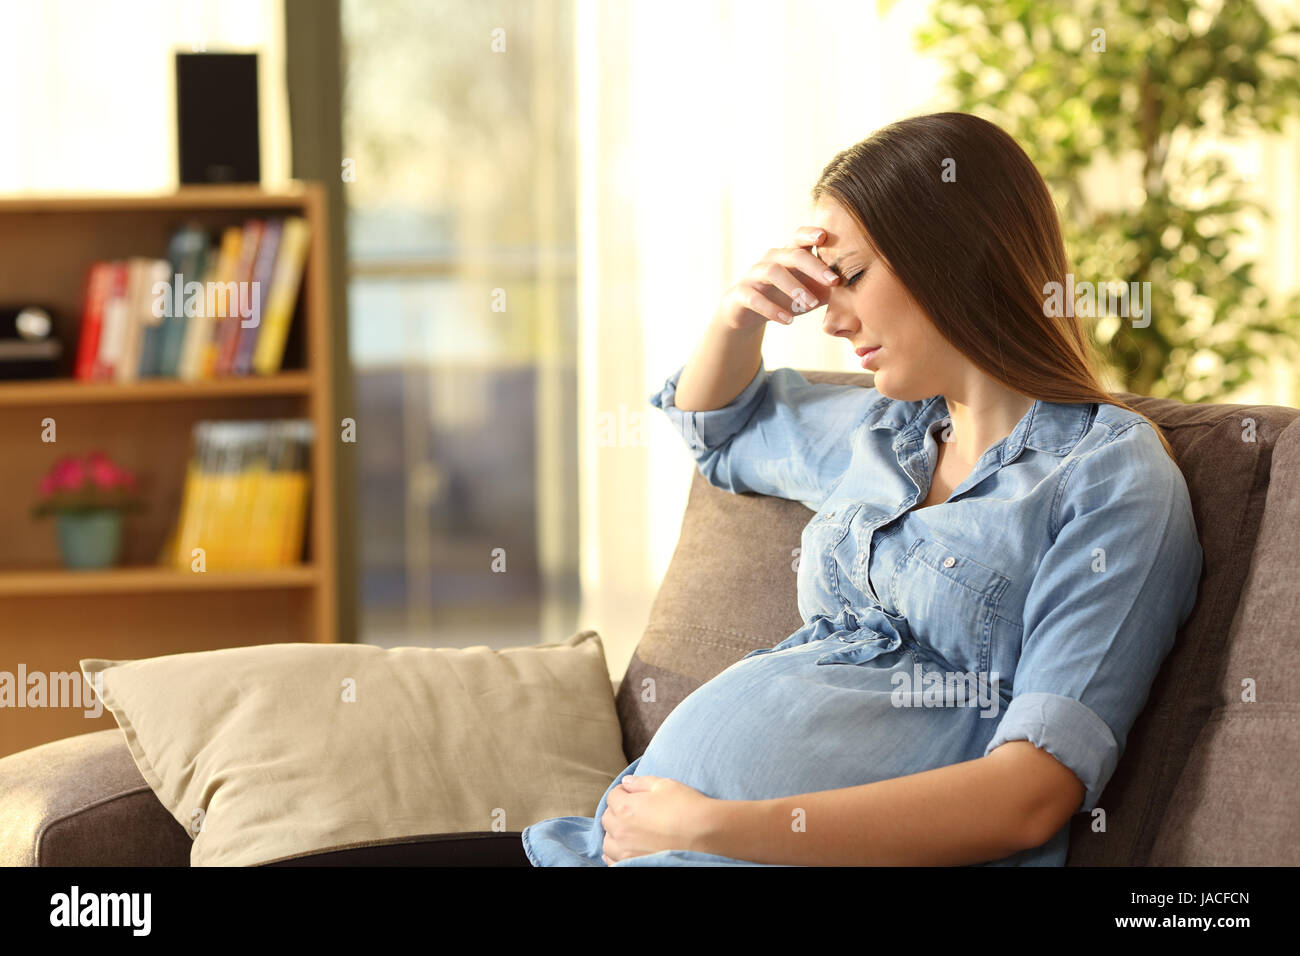 Worried pregnant woman sitting on a couch in the living room at home Stock Photo